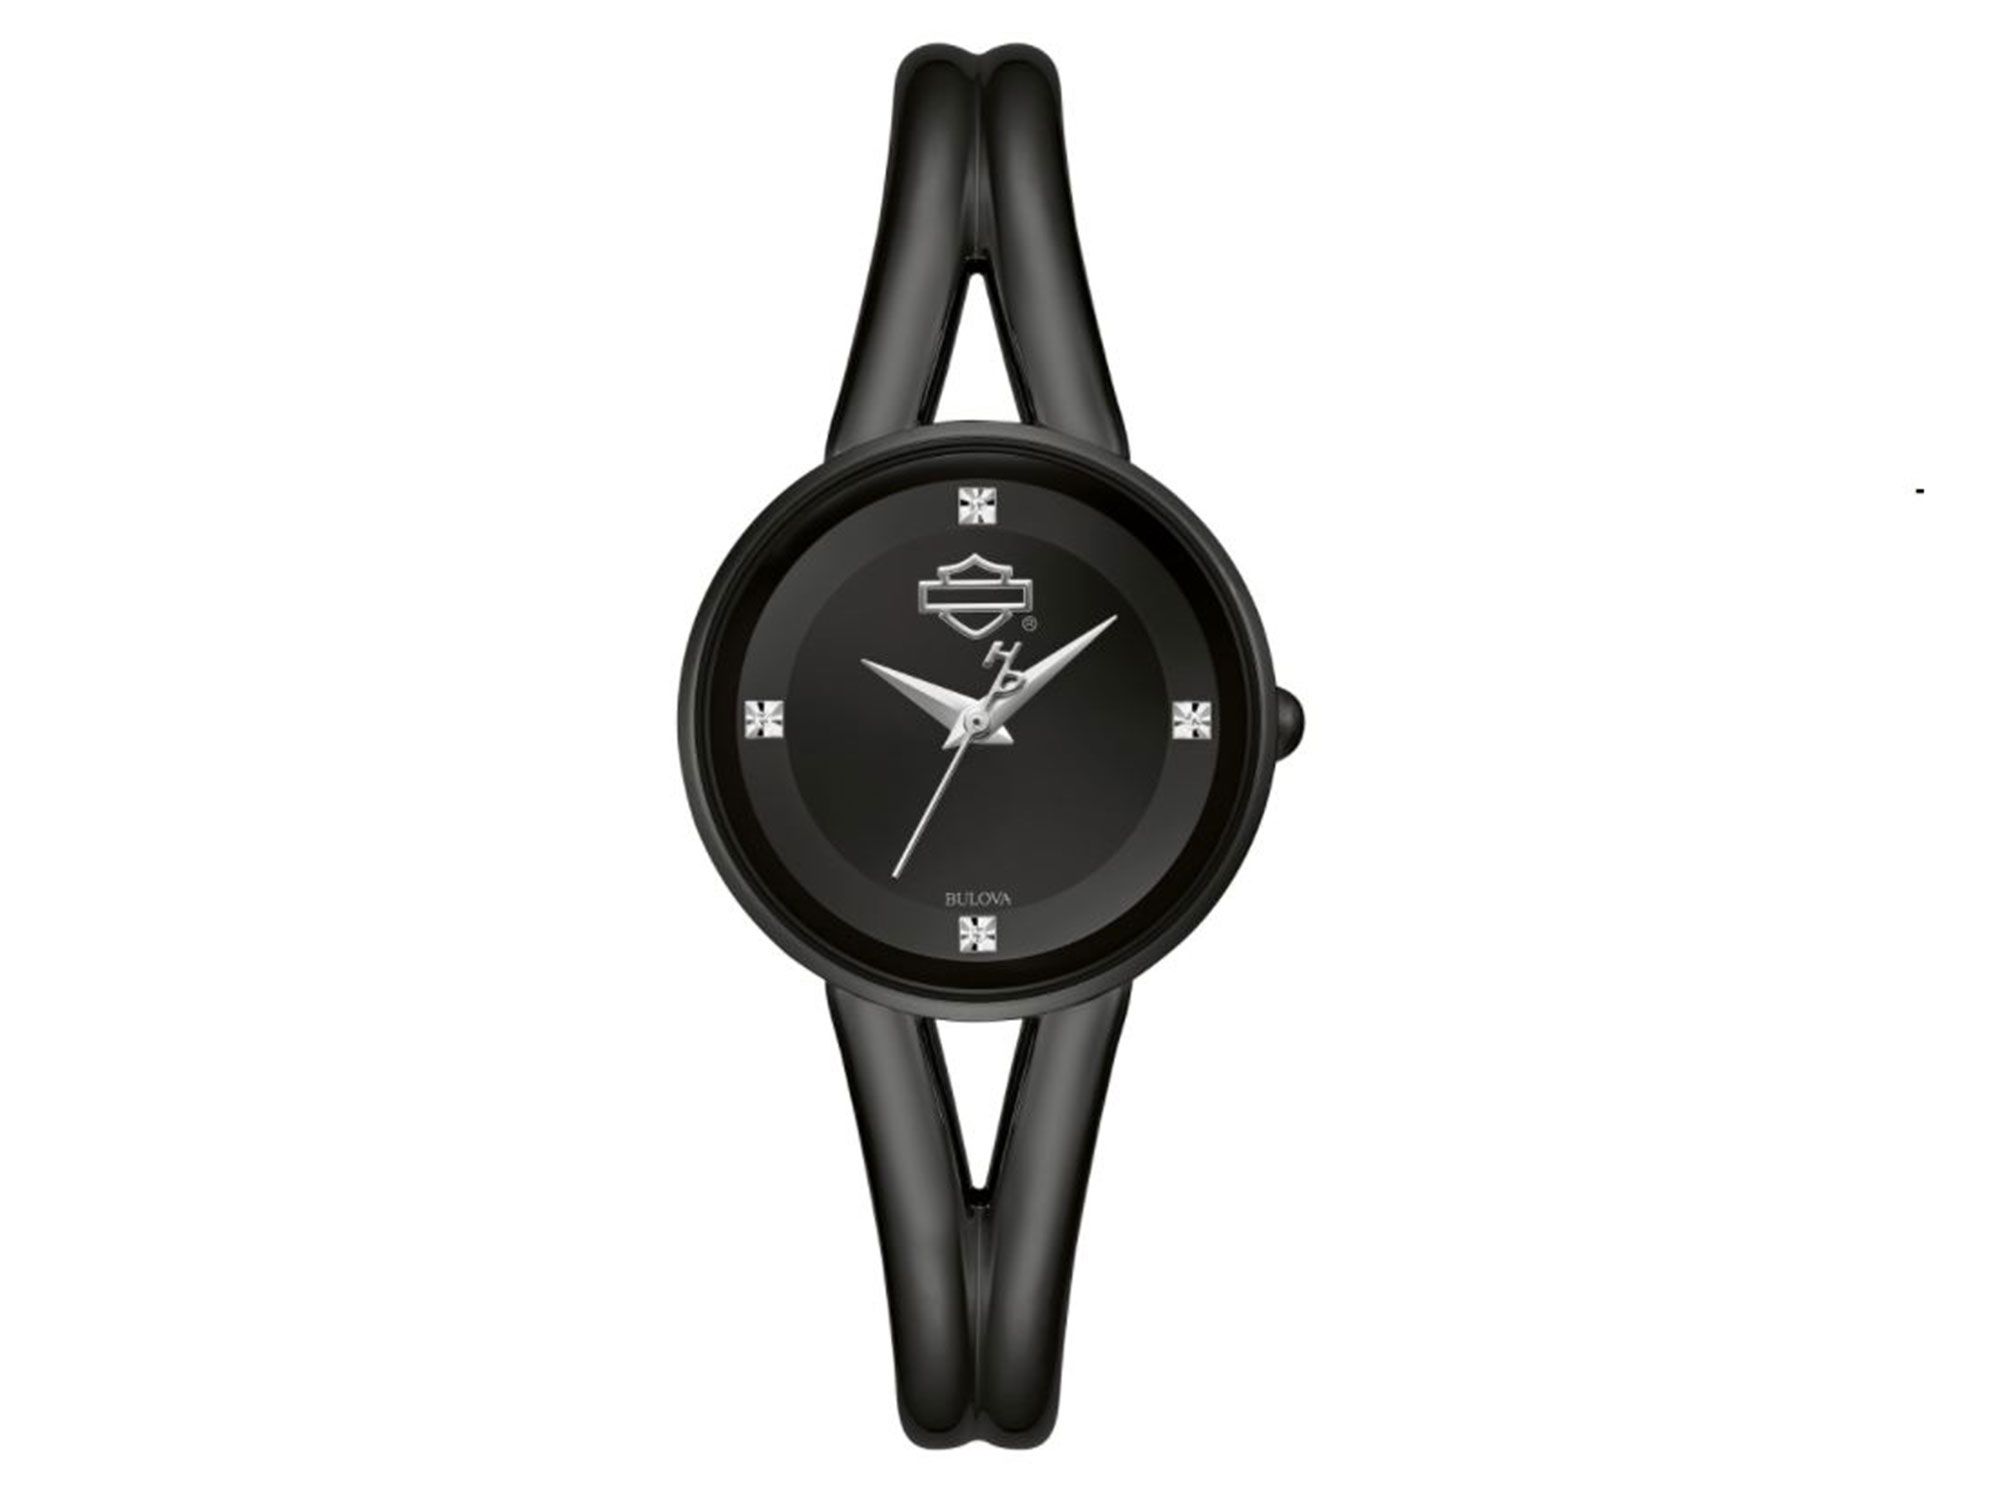 For the Harley-riding mom, this watch will be an elegant accessory she’ll be proud to show off.